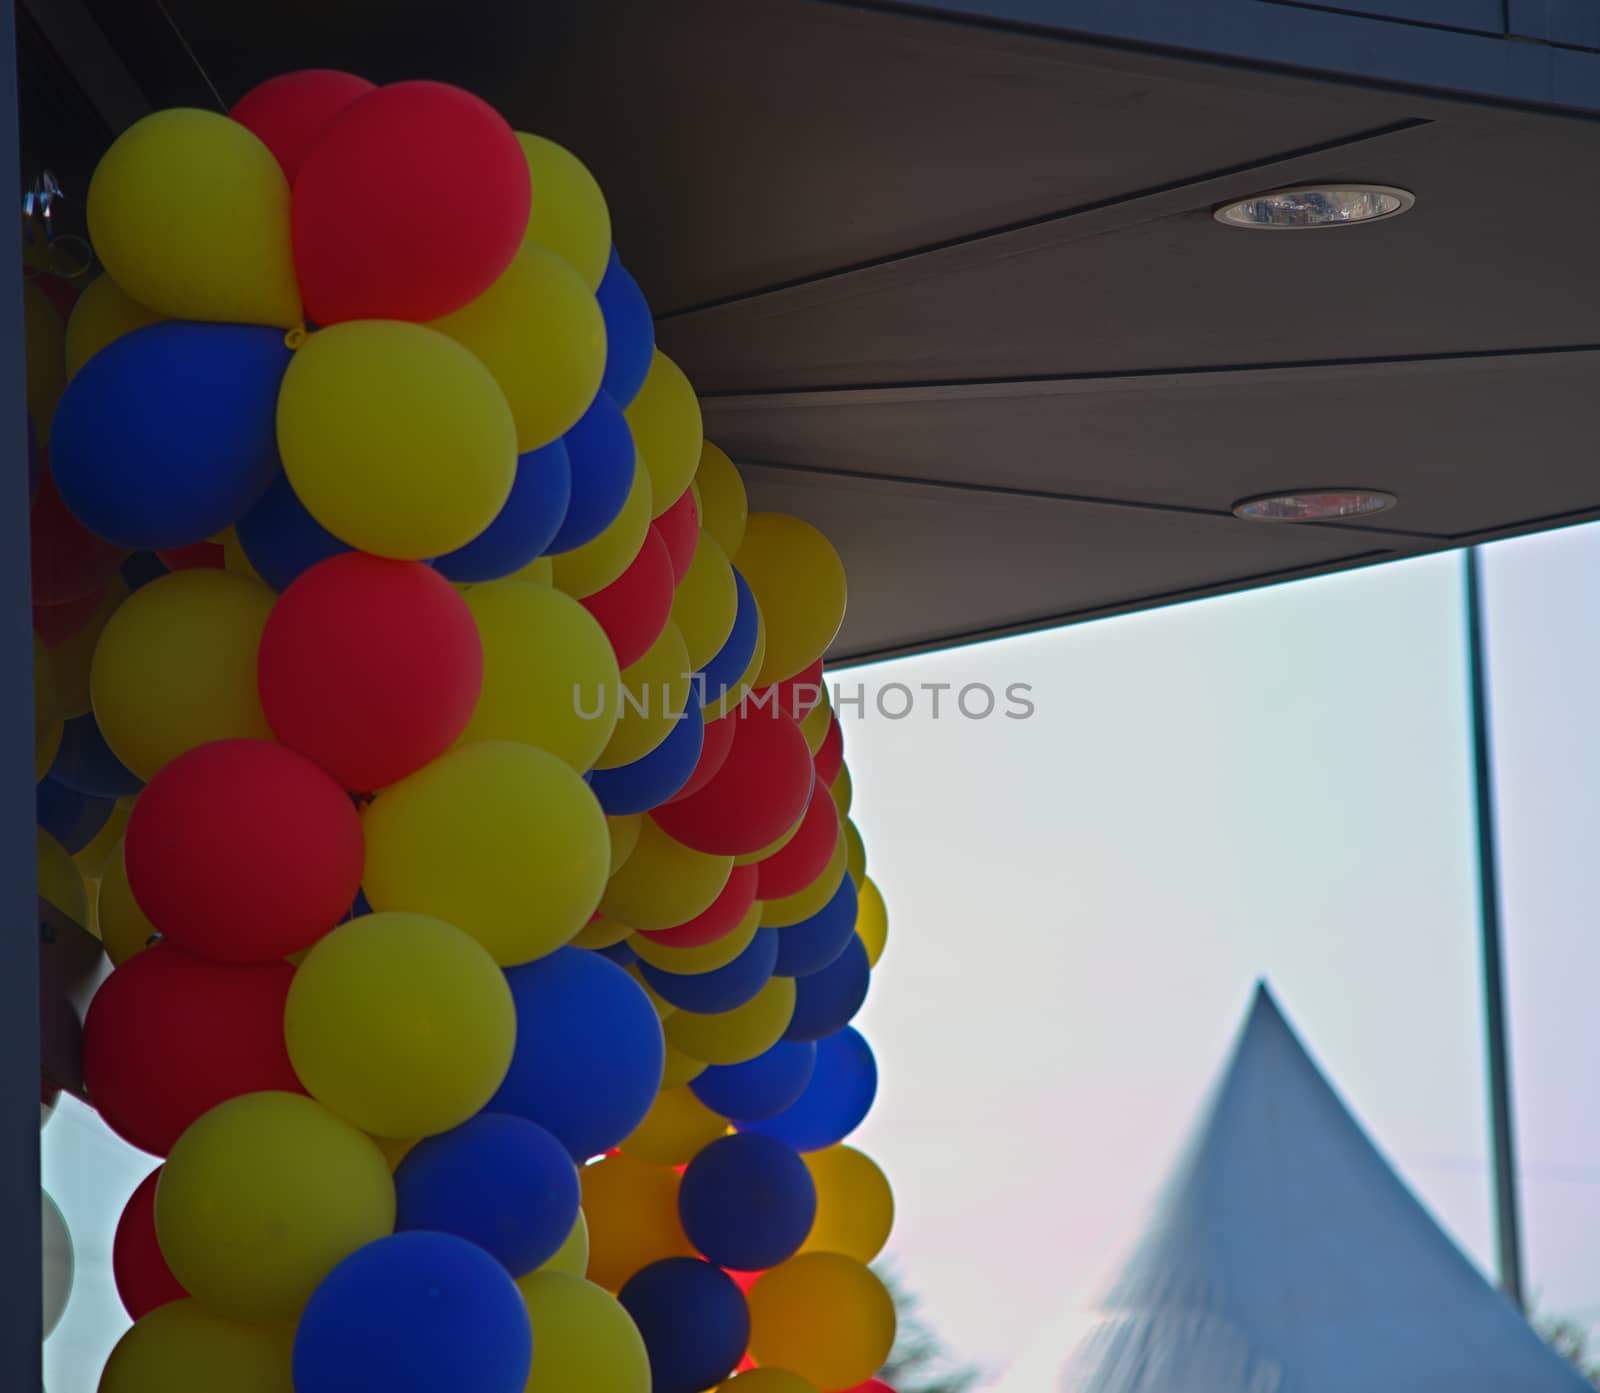 Colorful balloons over glass entrance door